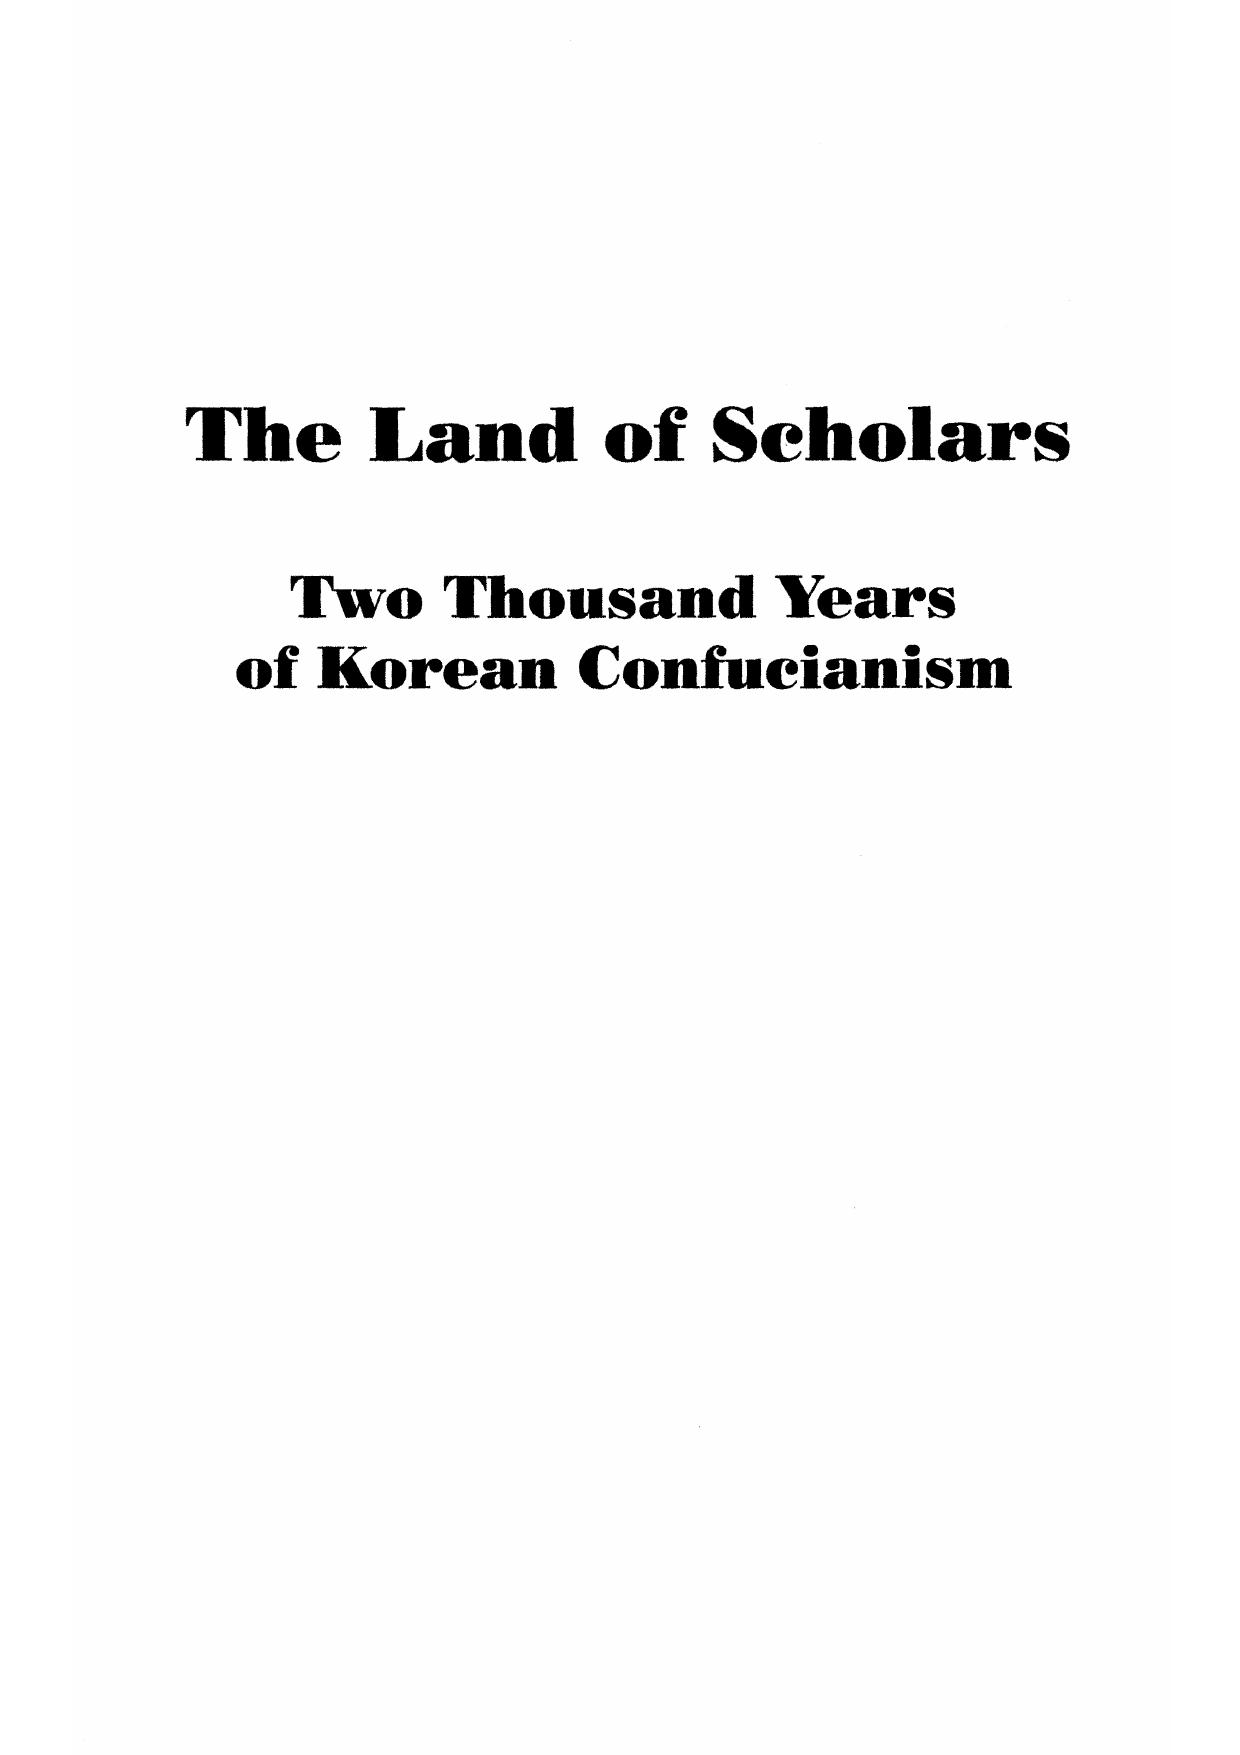 The Land of Scholars: Two Thousand Years of Korean Confucianism by Jae-eun Kang